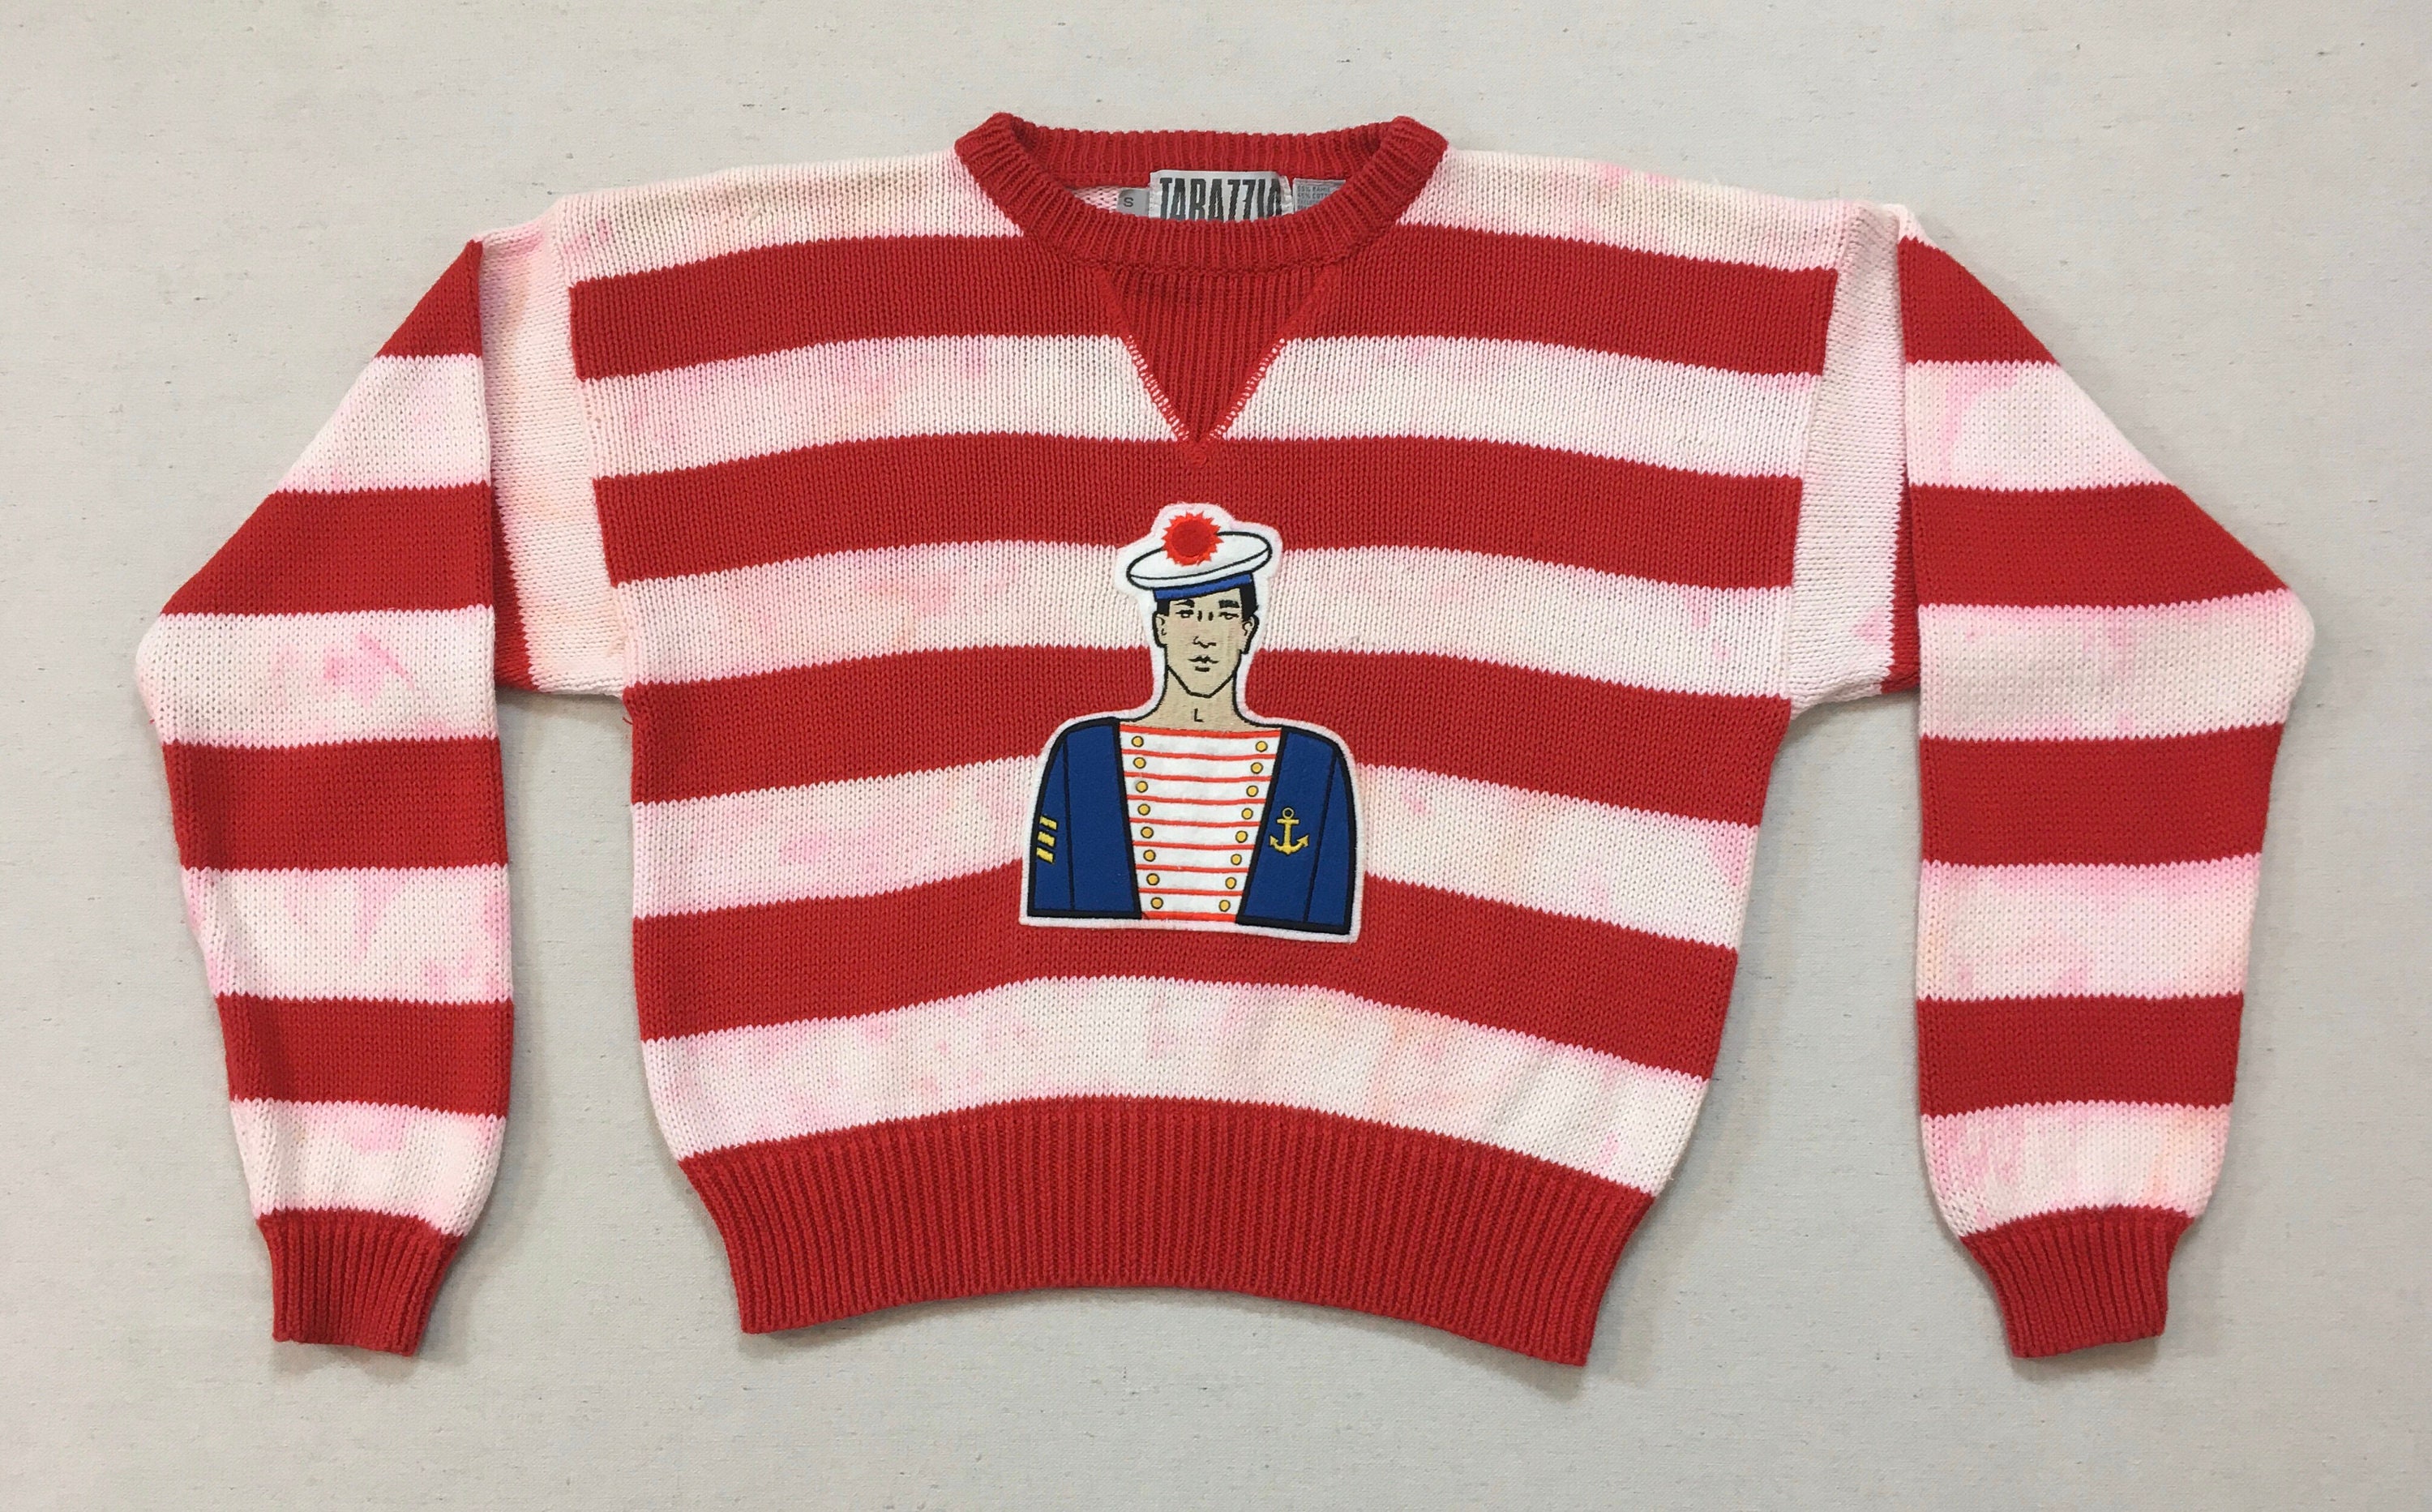 1980's, Ramie/Cotton Blend, Sailor Patch Sweater, in Red & White Stripes, By Tarazzia